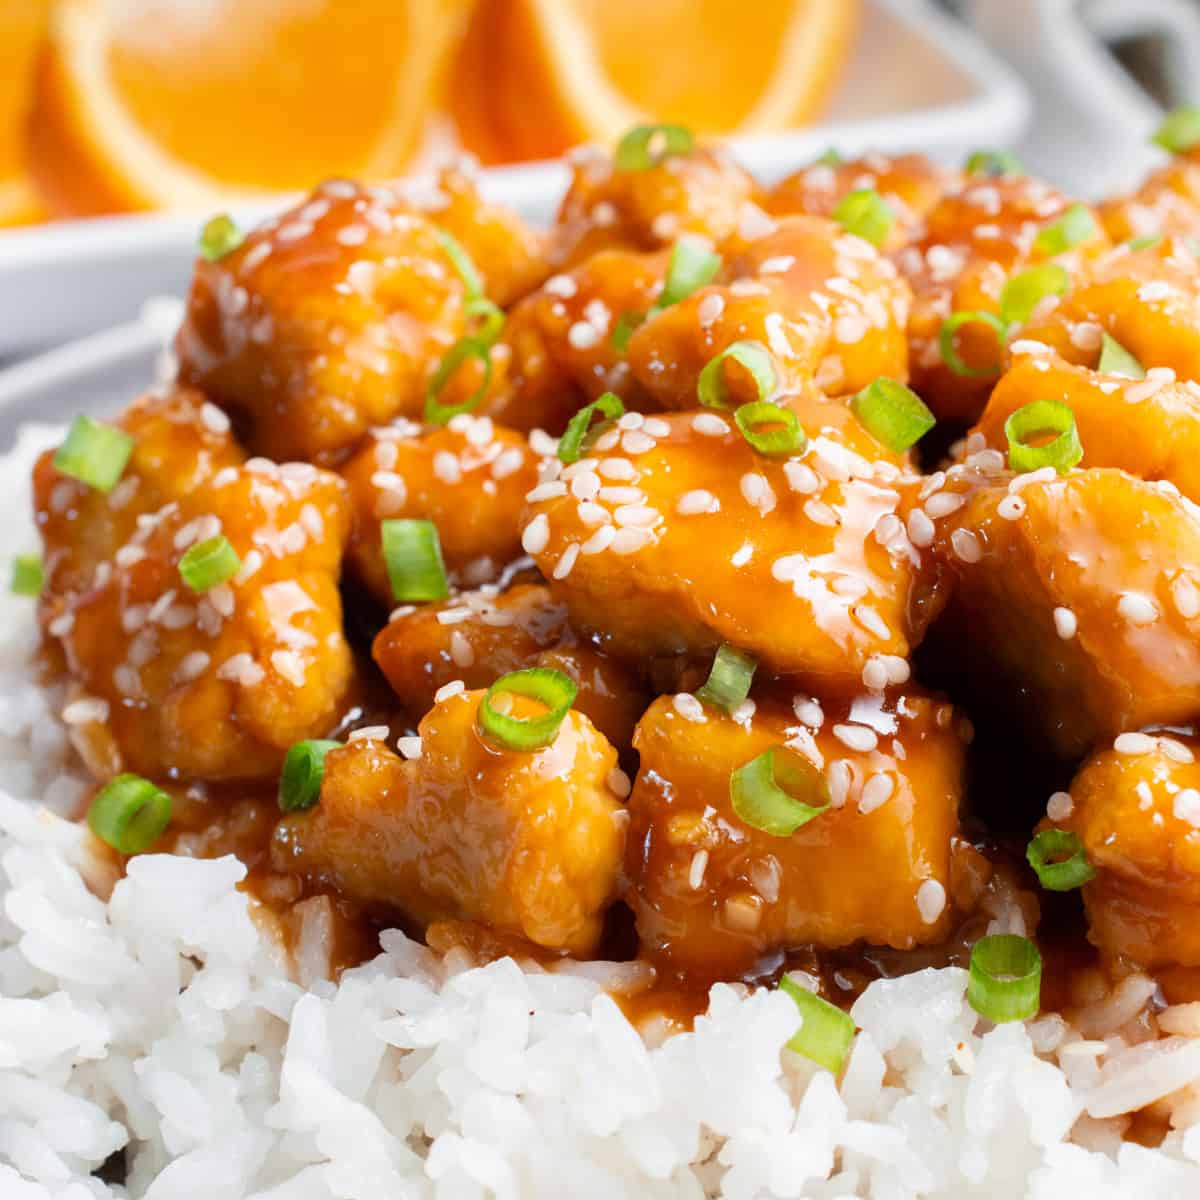 Orange tofu on a bed of white rice topped with sesame seeds and chopped green onion. There are orange slices on a plate in the background.